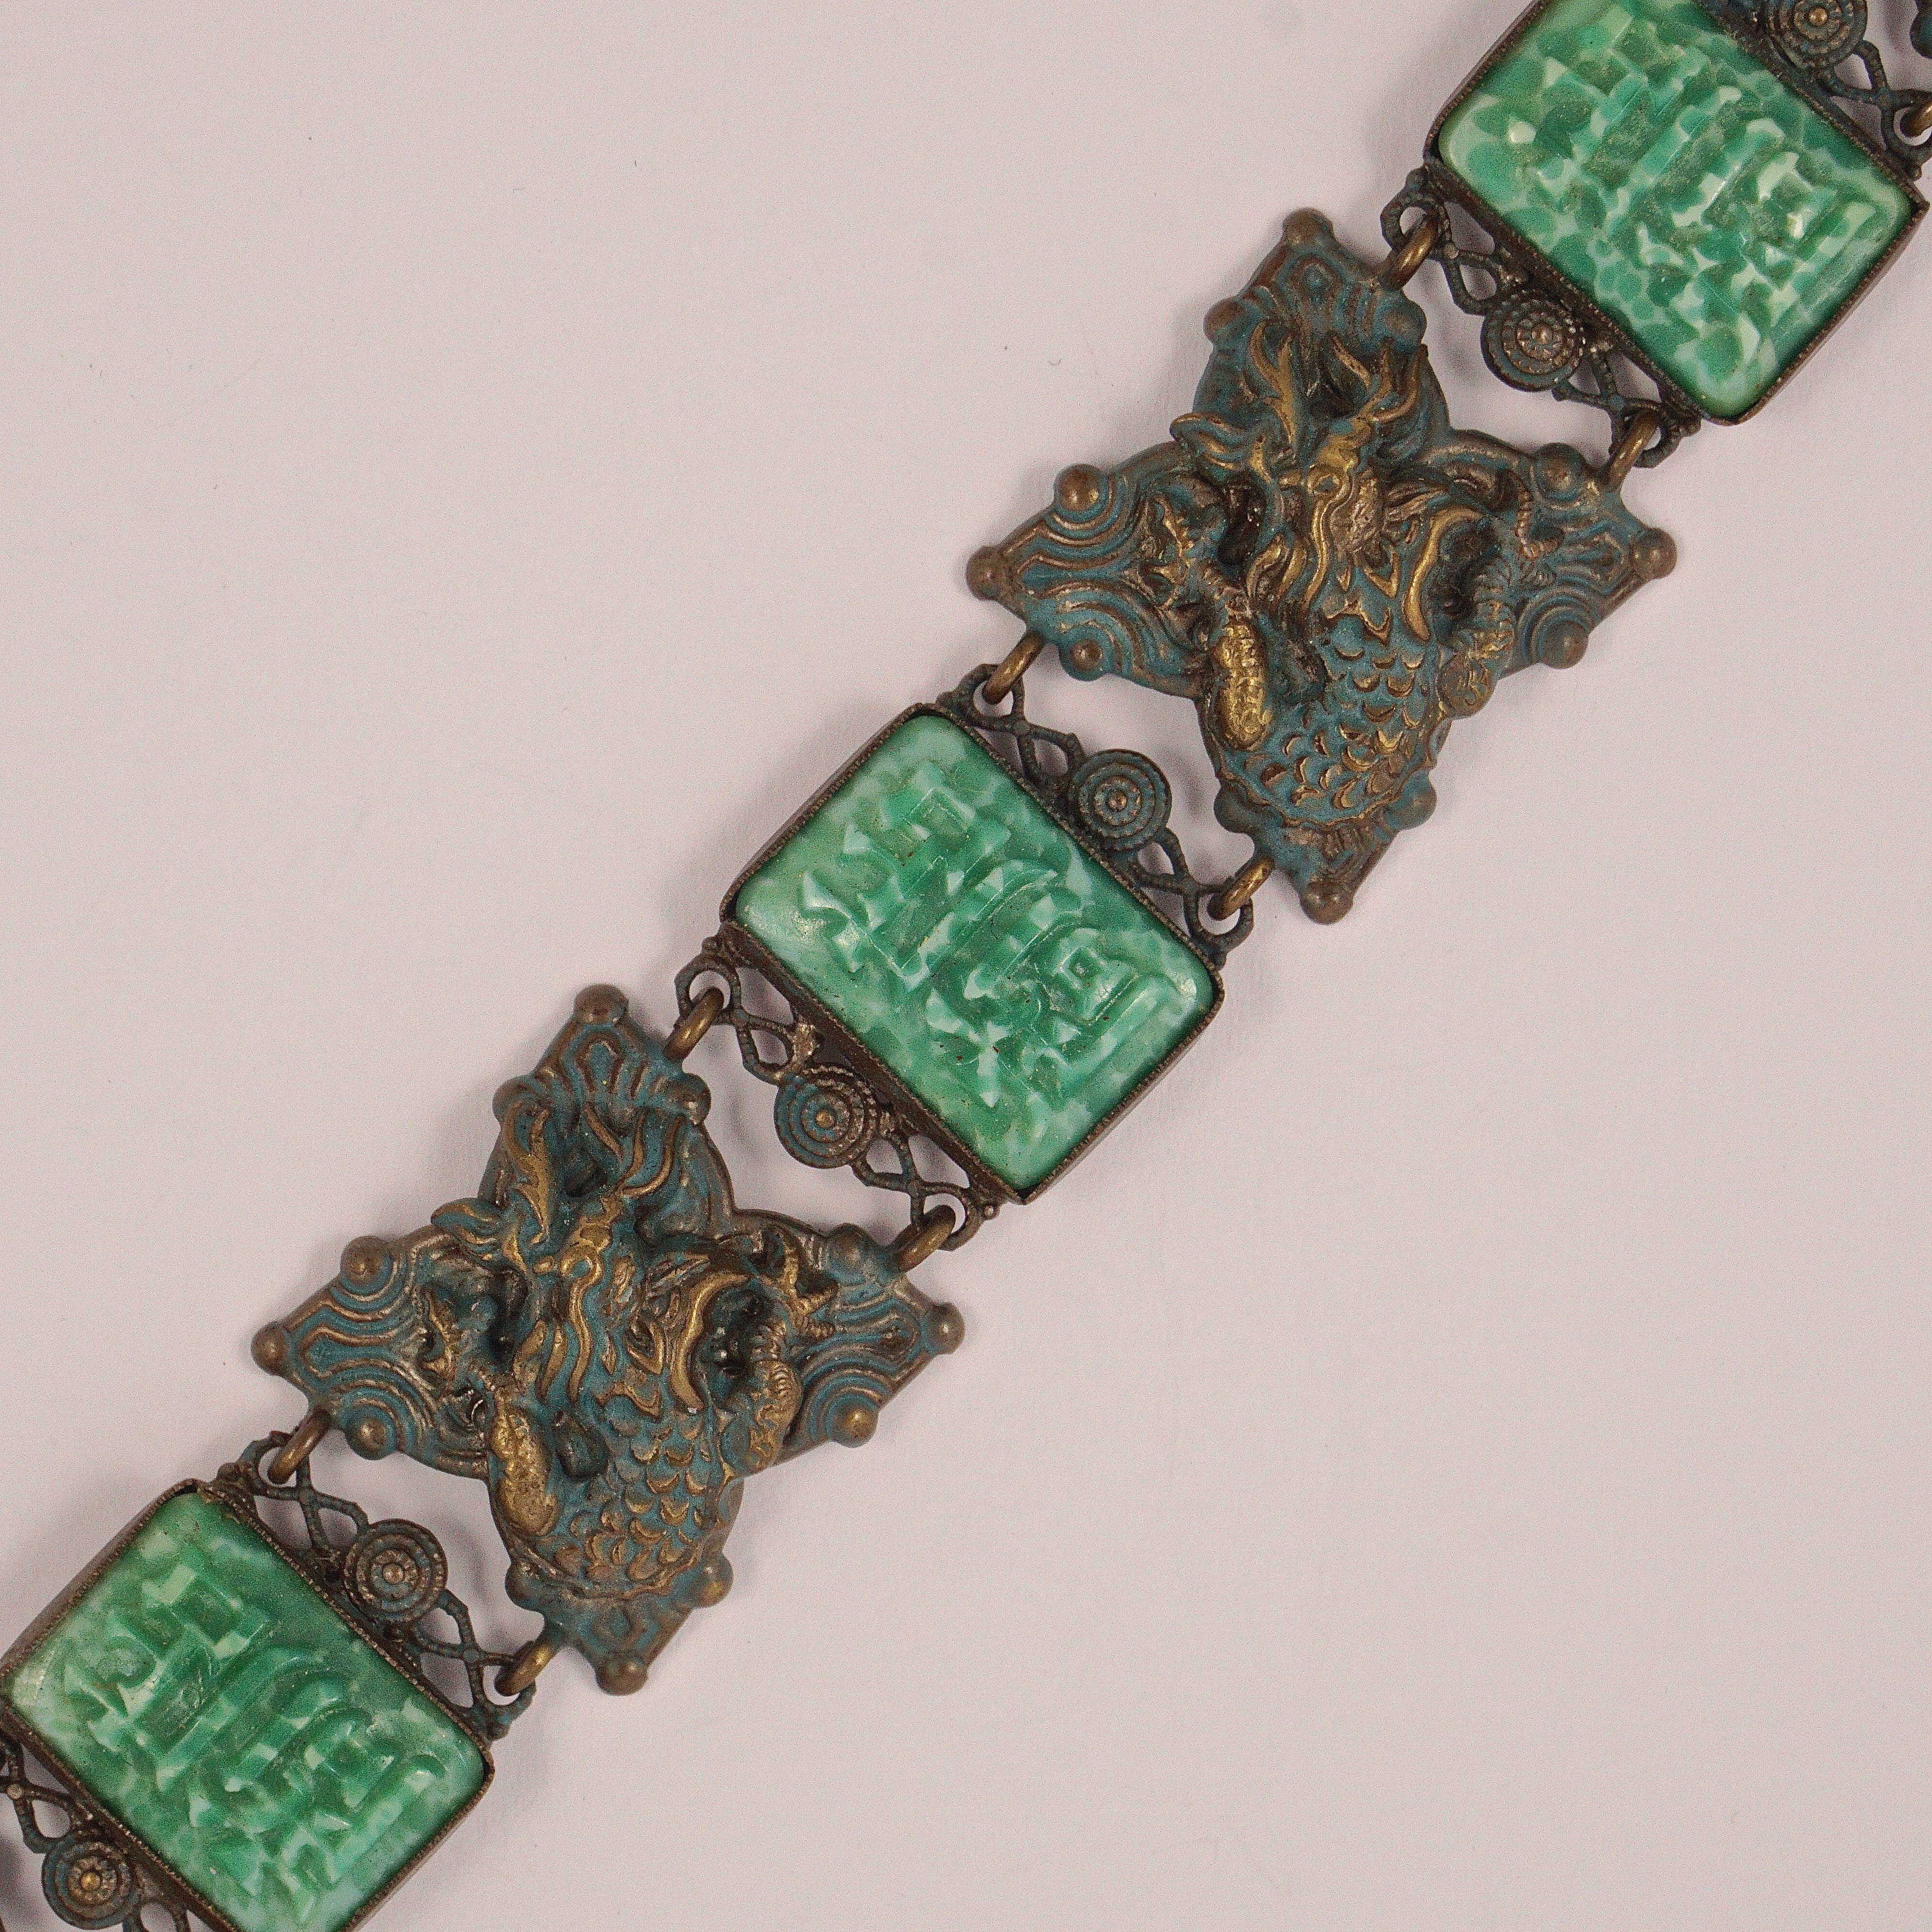 Wonderful bronze tone Chinese bracelet, with detailed dragons hand painted in gold and blue enamel, and oblong peking glass links. It has double link connectors, and a spring bolt clasp which is a little stiff but works well. Measuring length 18.7cm